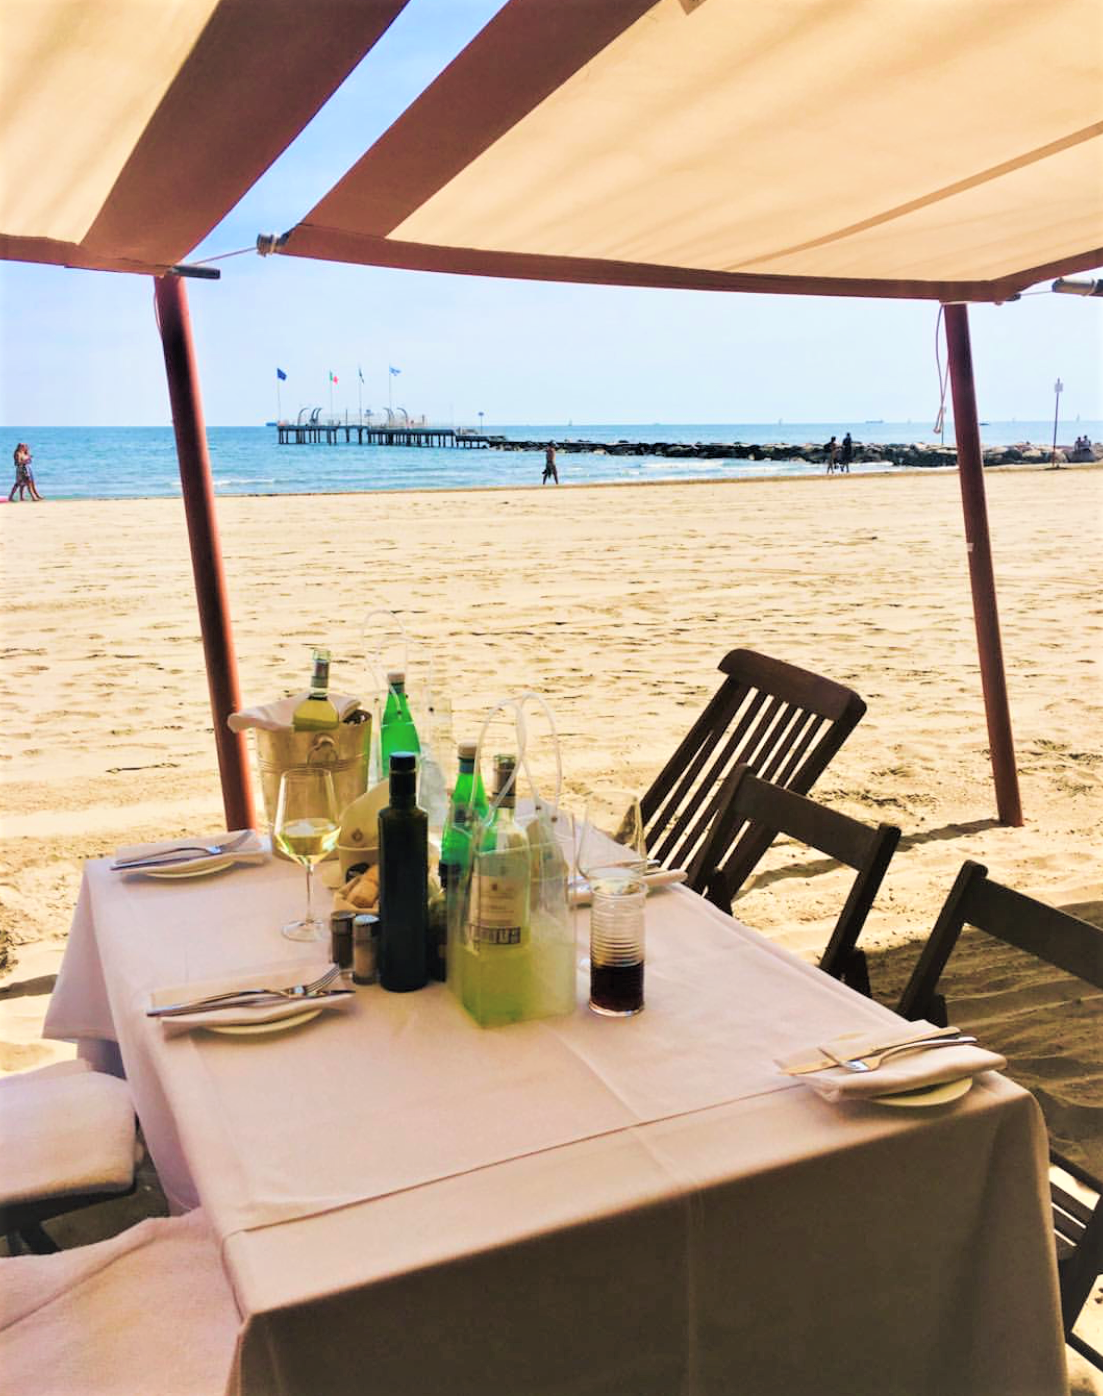 Gourmet dining on the beach of Venice, Italy | Hotel Excelsior Venice Lido Resort